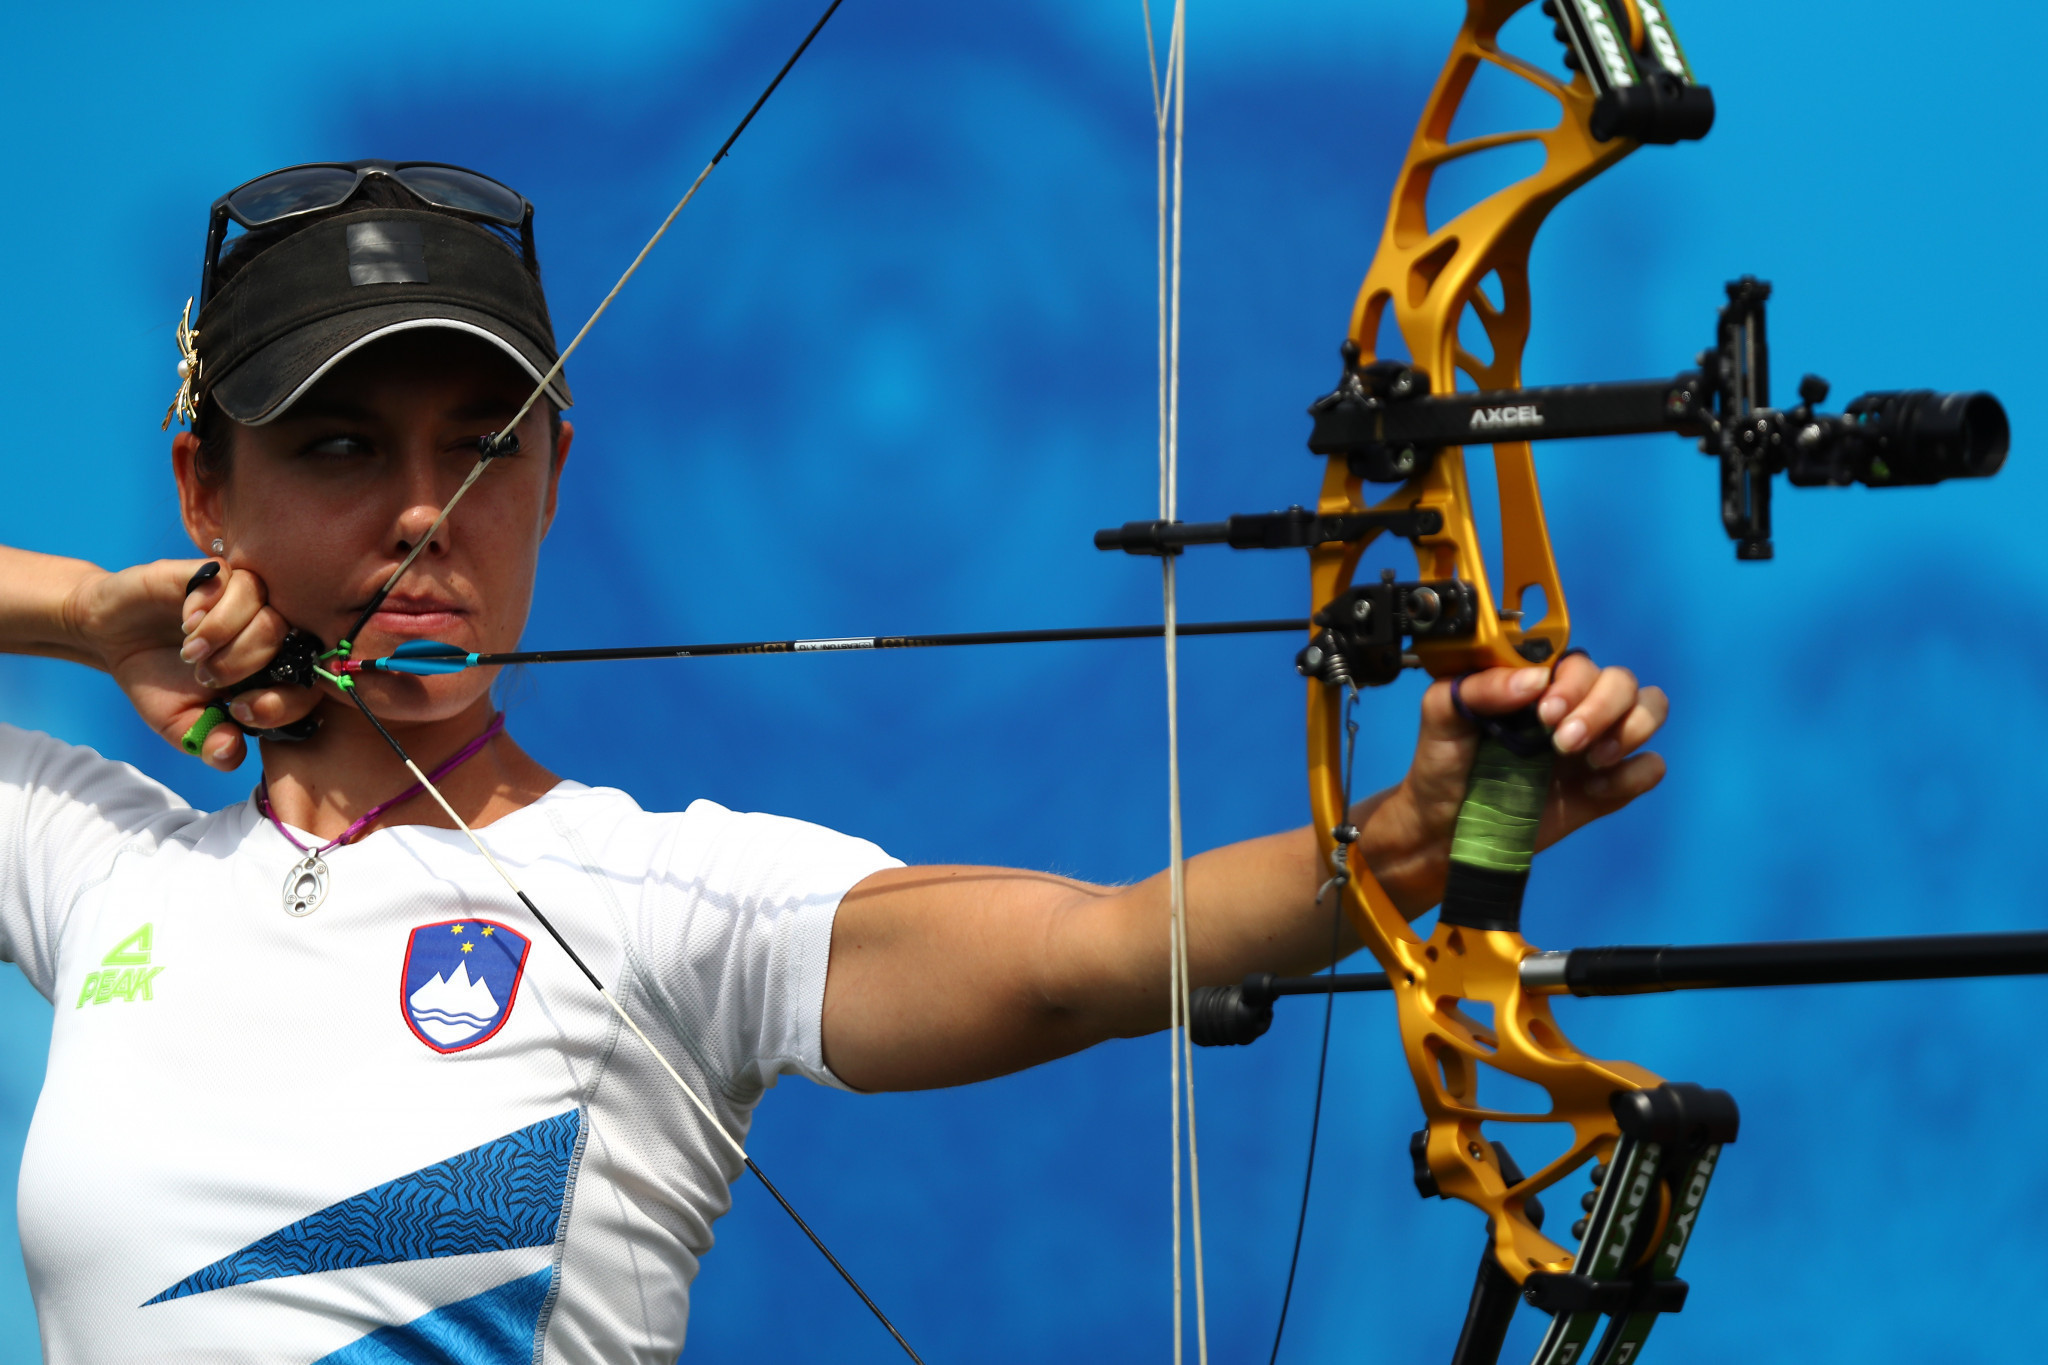 British youngster Healey among champions at Indoor Archery World Series finals